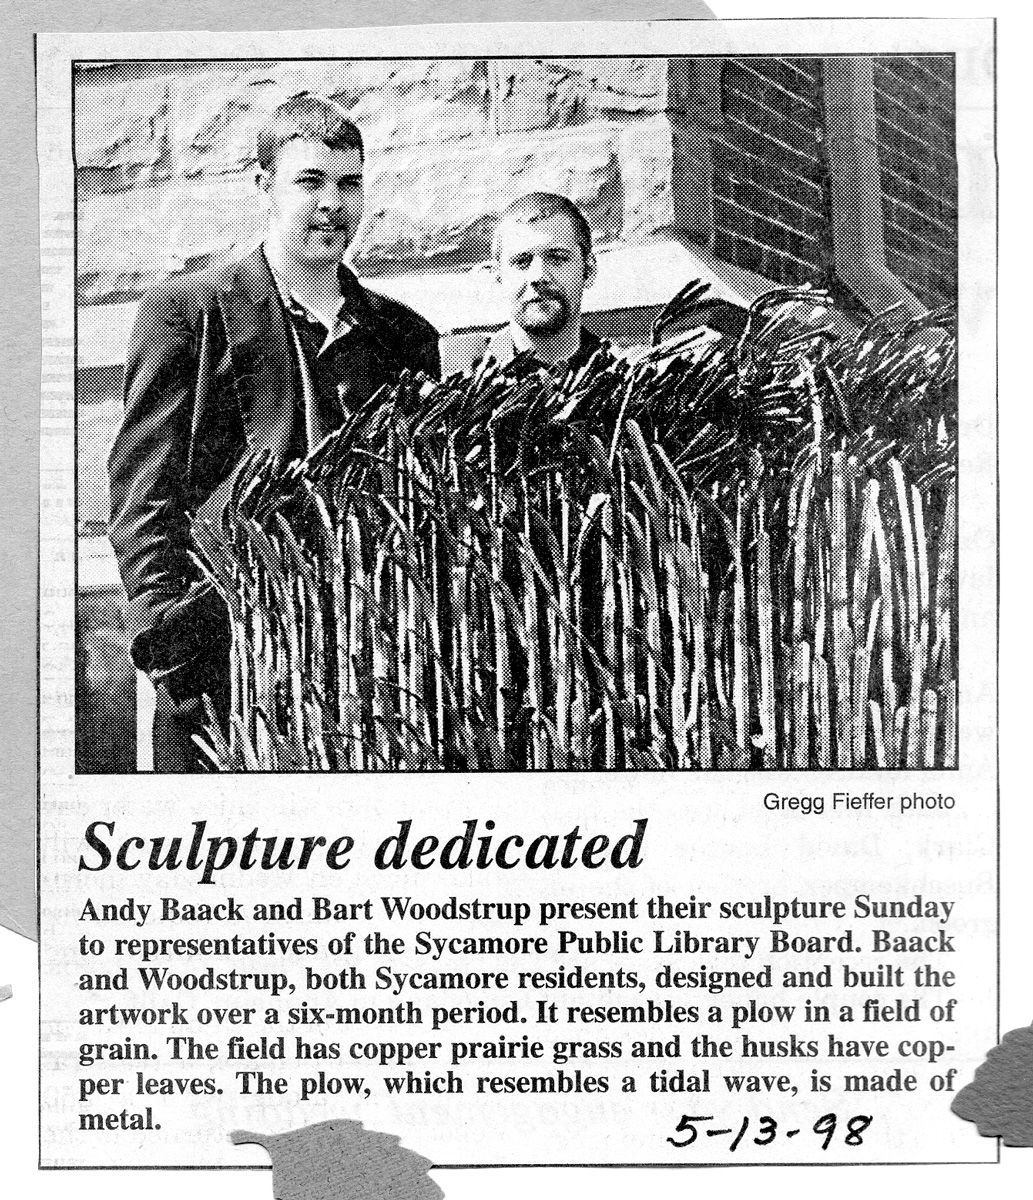 A local news article about the sculpture.